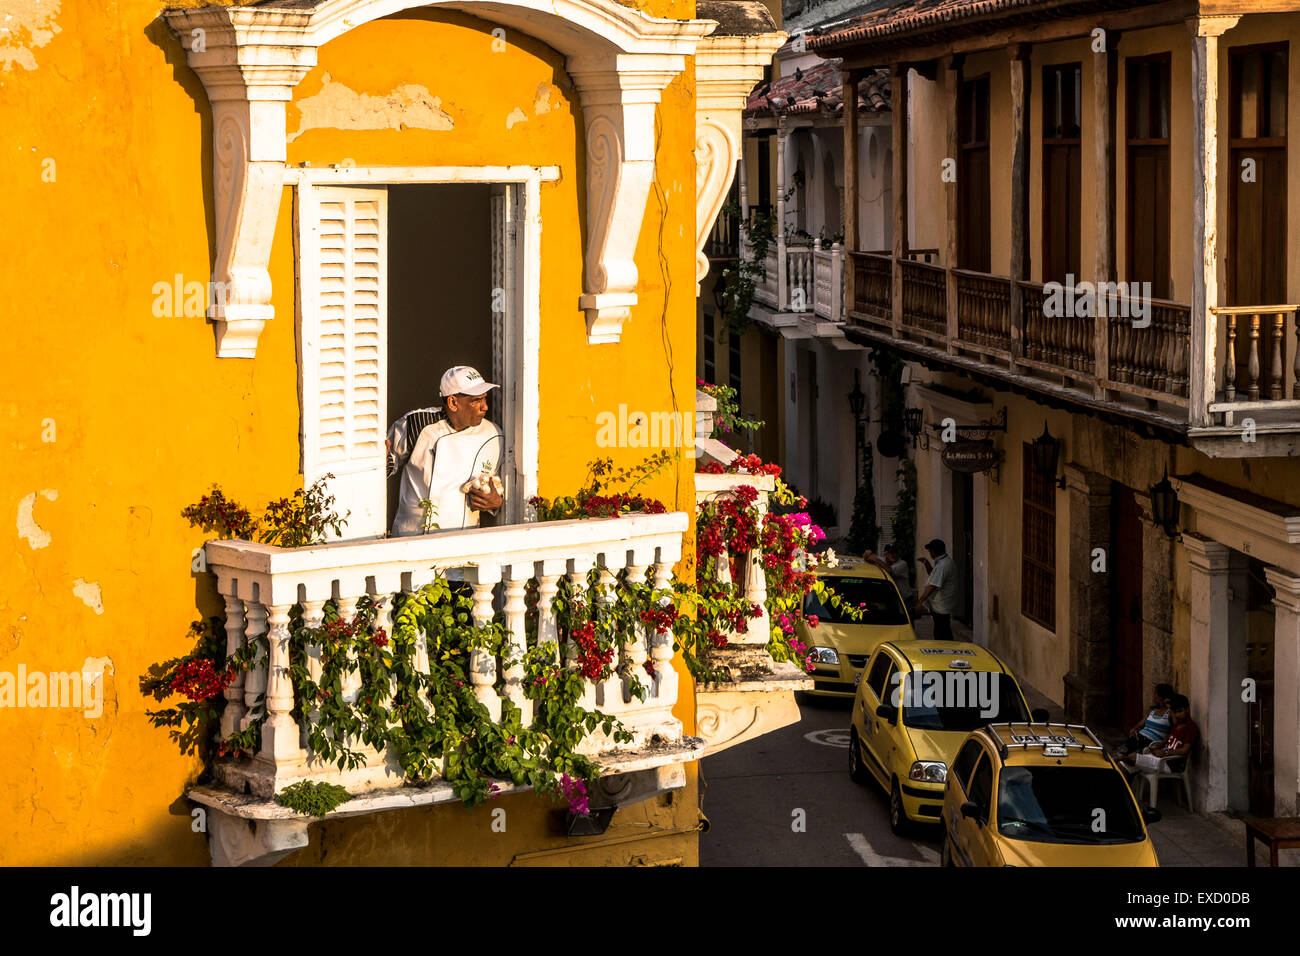 An afro-latino man peers from the balcony of a colonial heritage building in the Ciudad Vieja or old town of Cartagena, Colombia Stock Photo